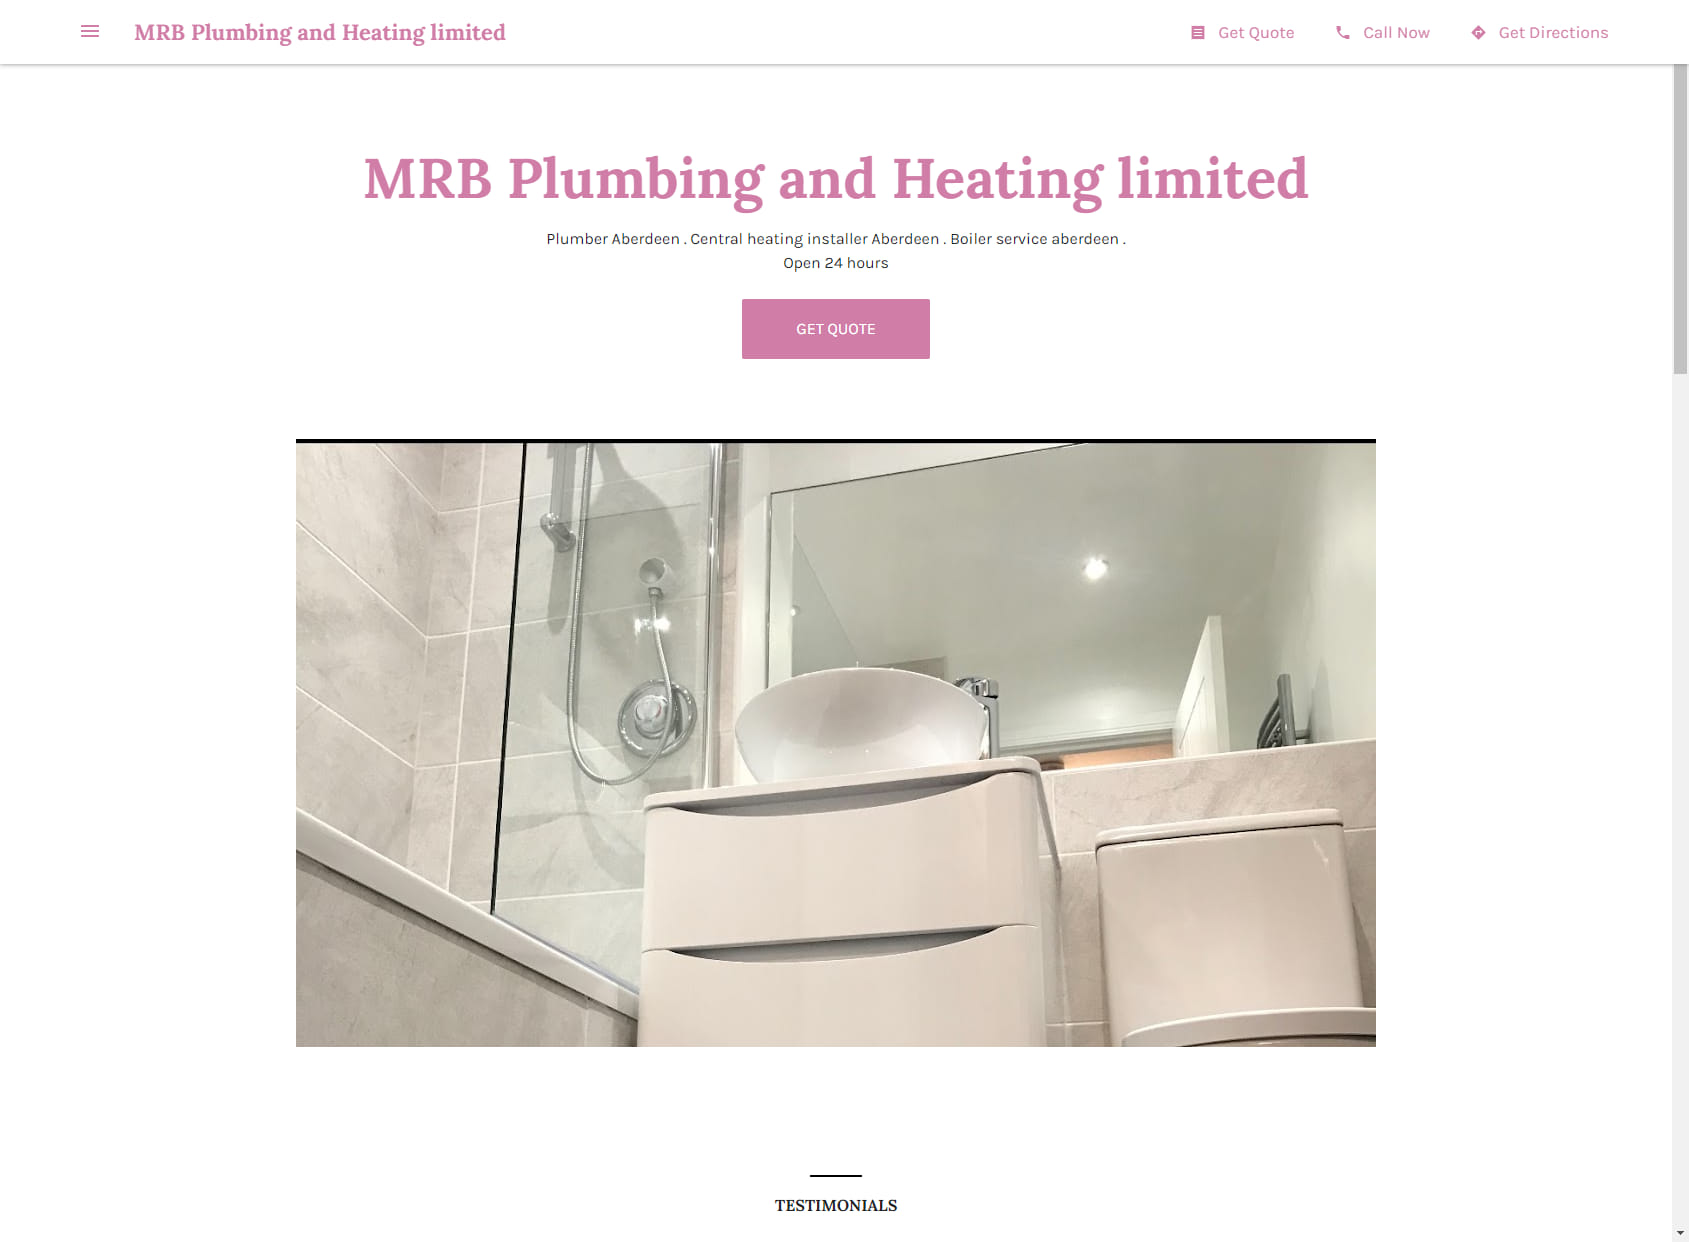 MRB Plumbing and Heating limited